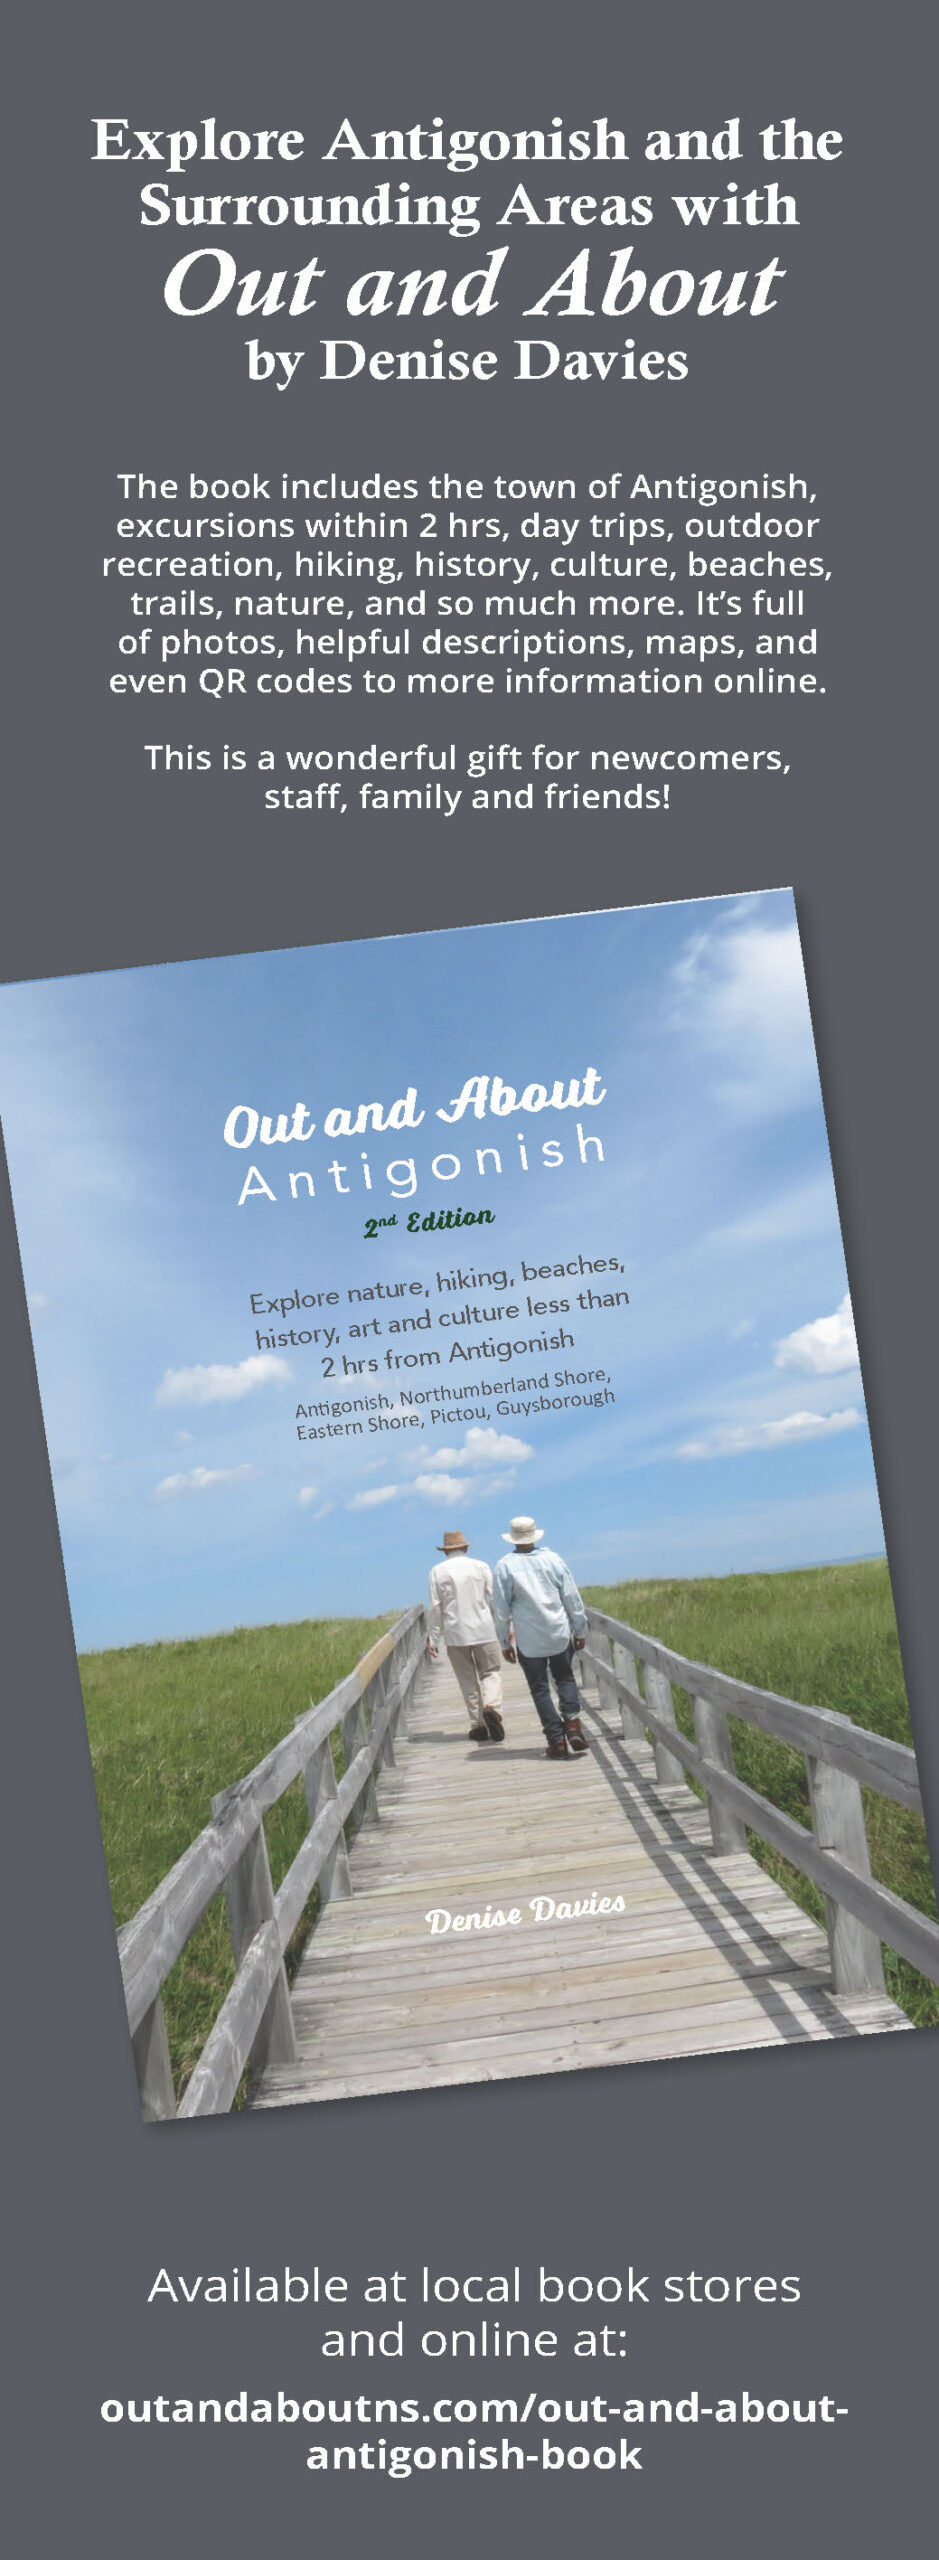 Out and About Book by Denise Davies, Antigonish, Nova Scotia